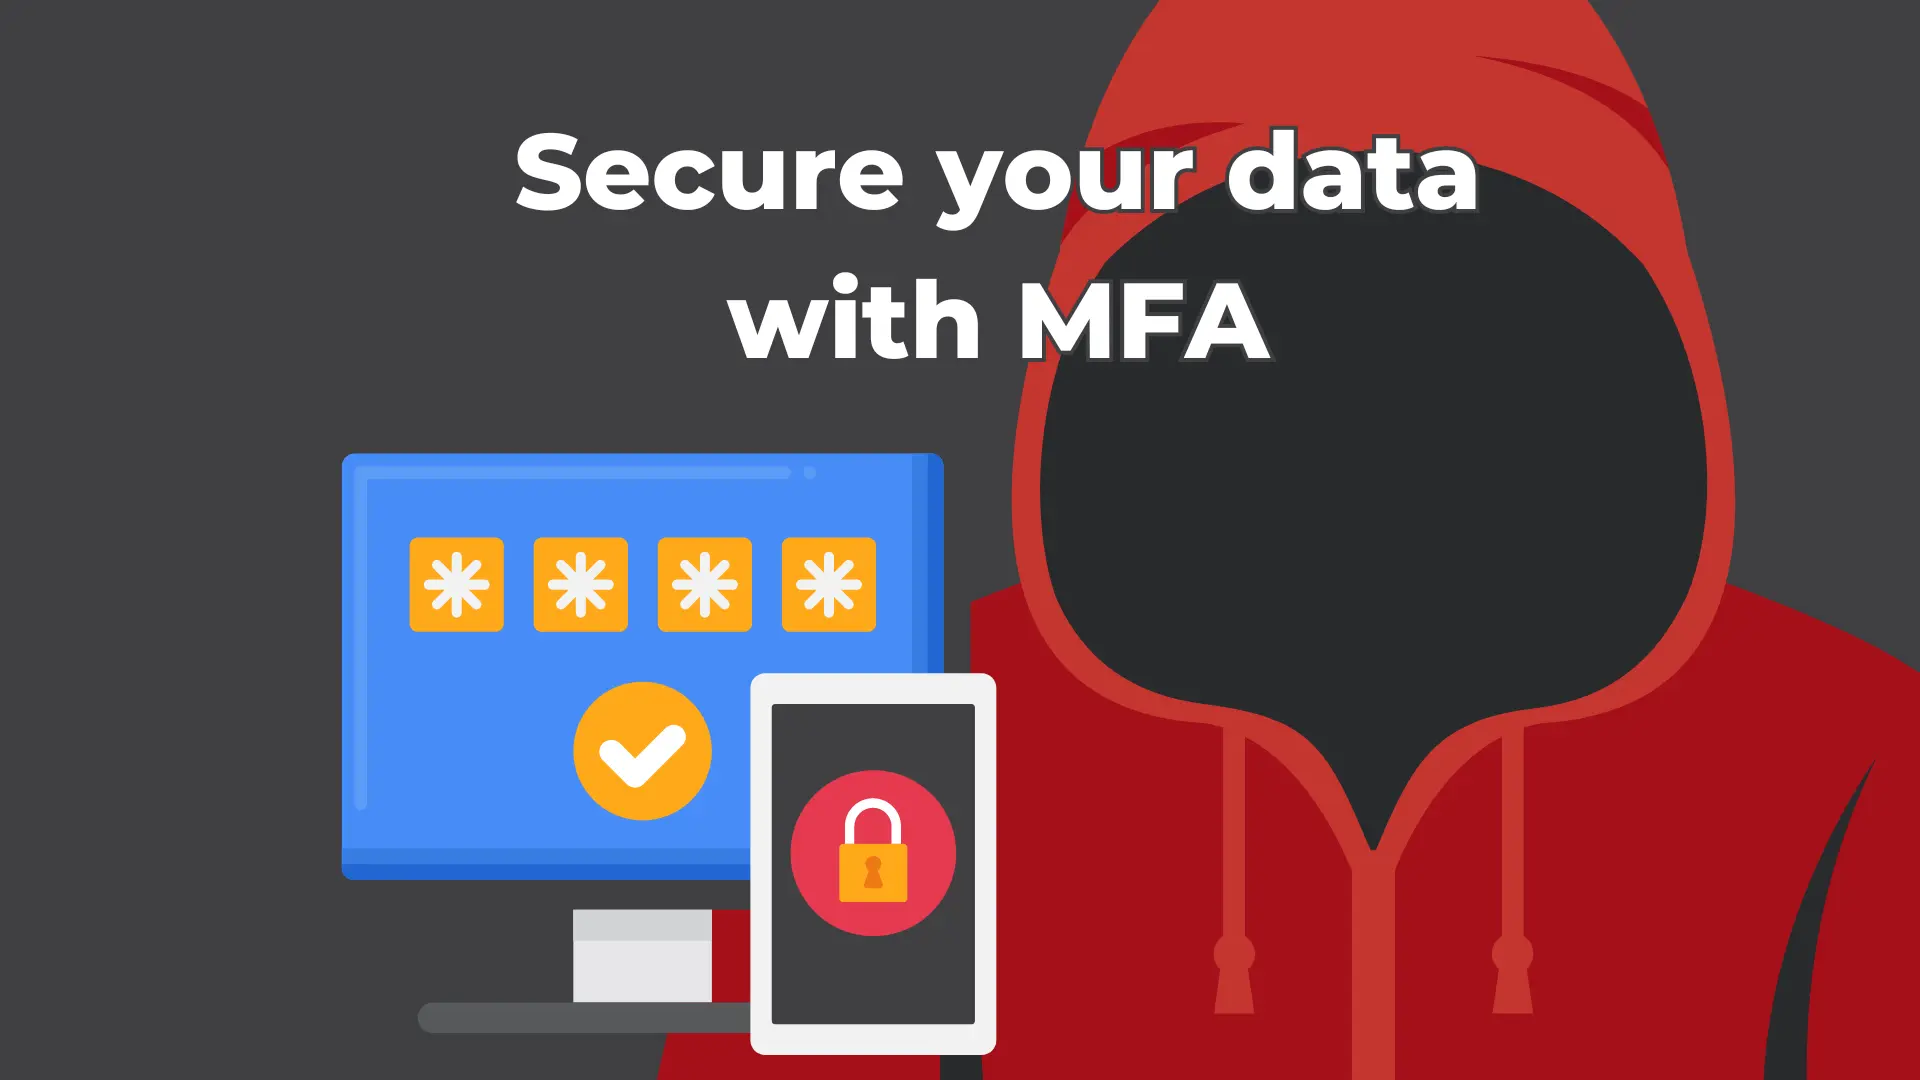 Multi Factor Authentication to keep your accounts secure